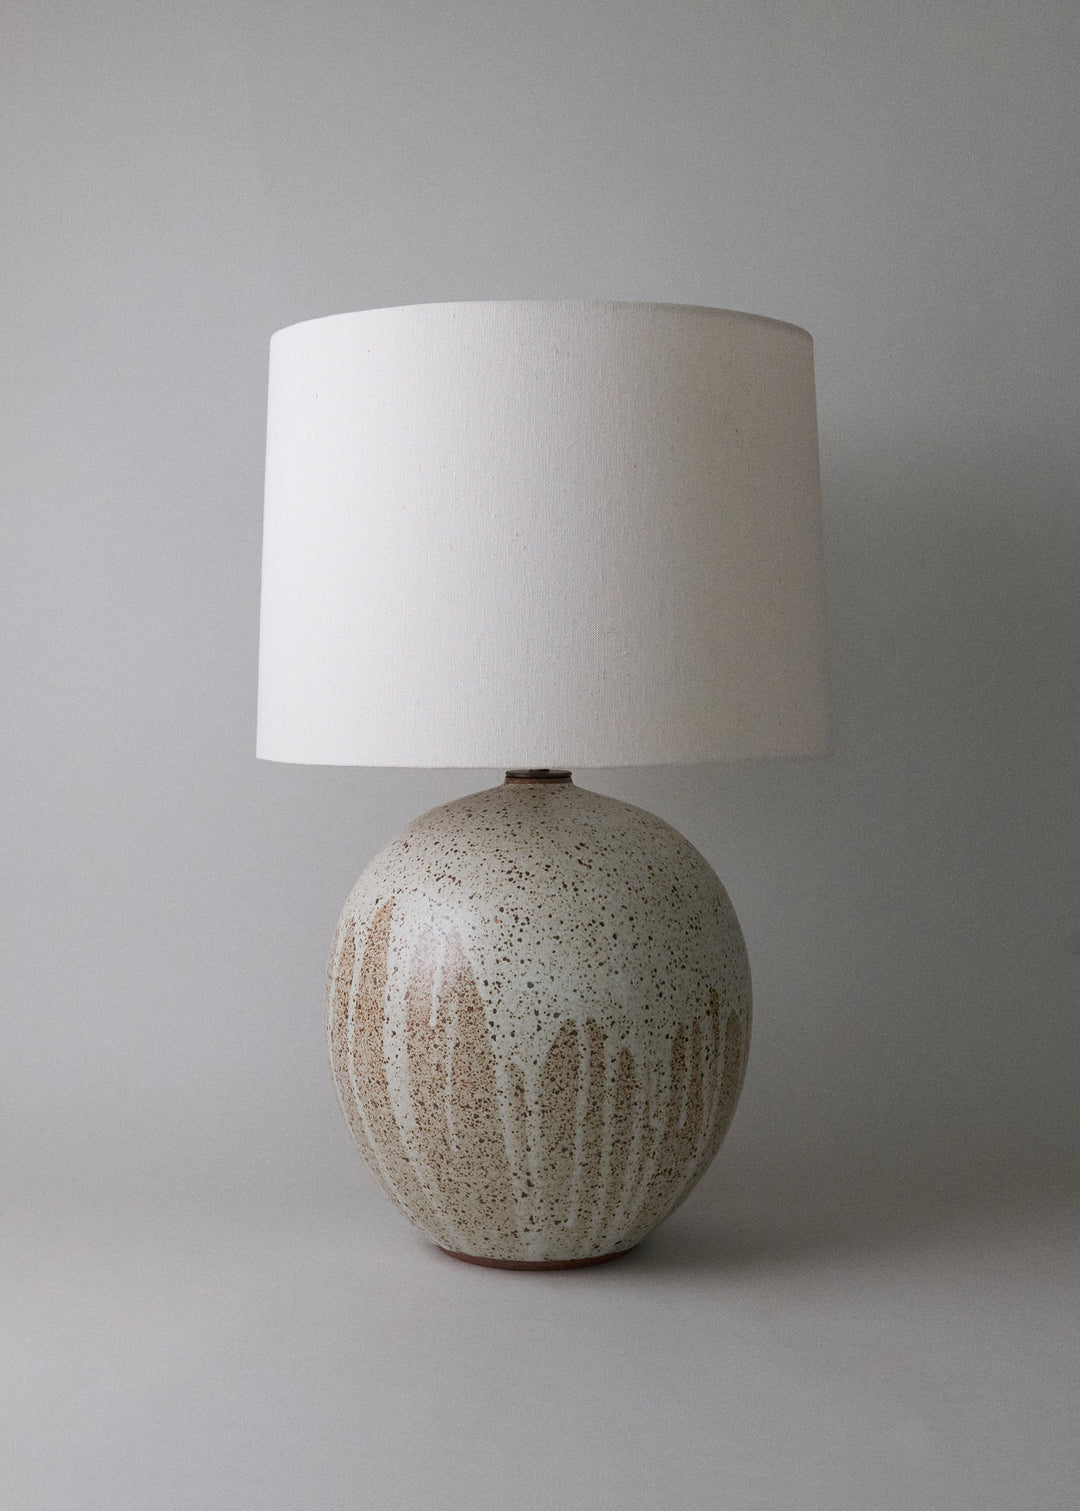 Large Orb Lamp in Mottled Ivory - Victoria Morris Pottery